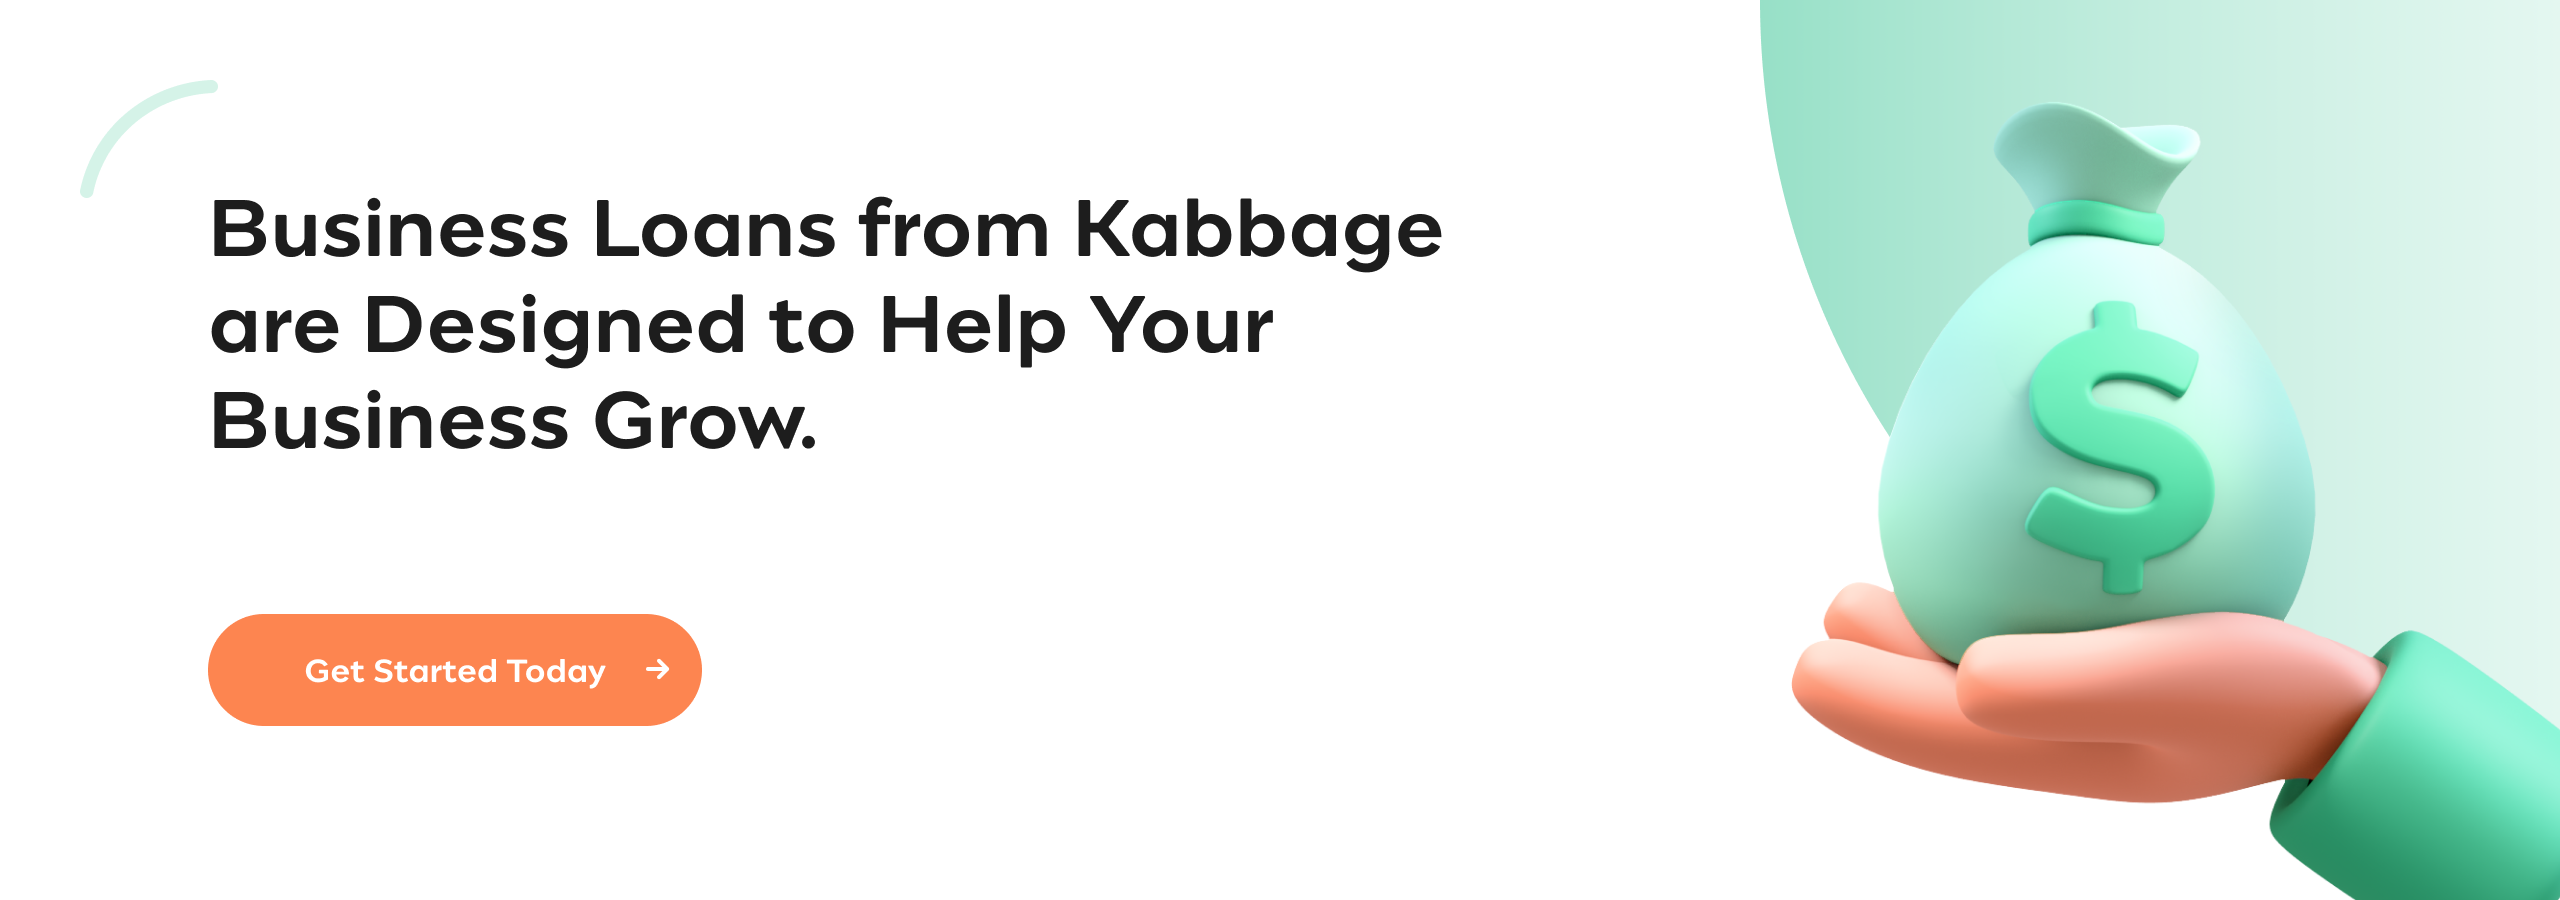 Business Loans from Kabbage are Designed to Help Your Business Grow. Get Started Today.